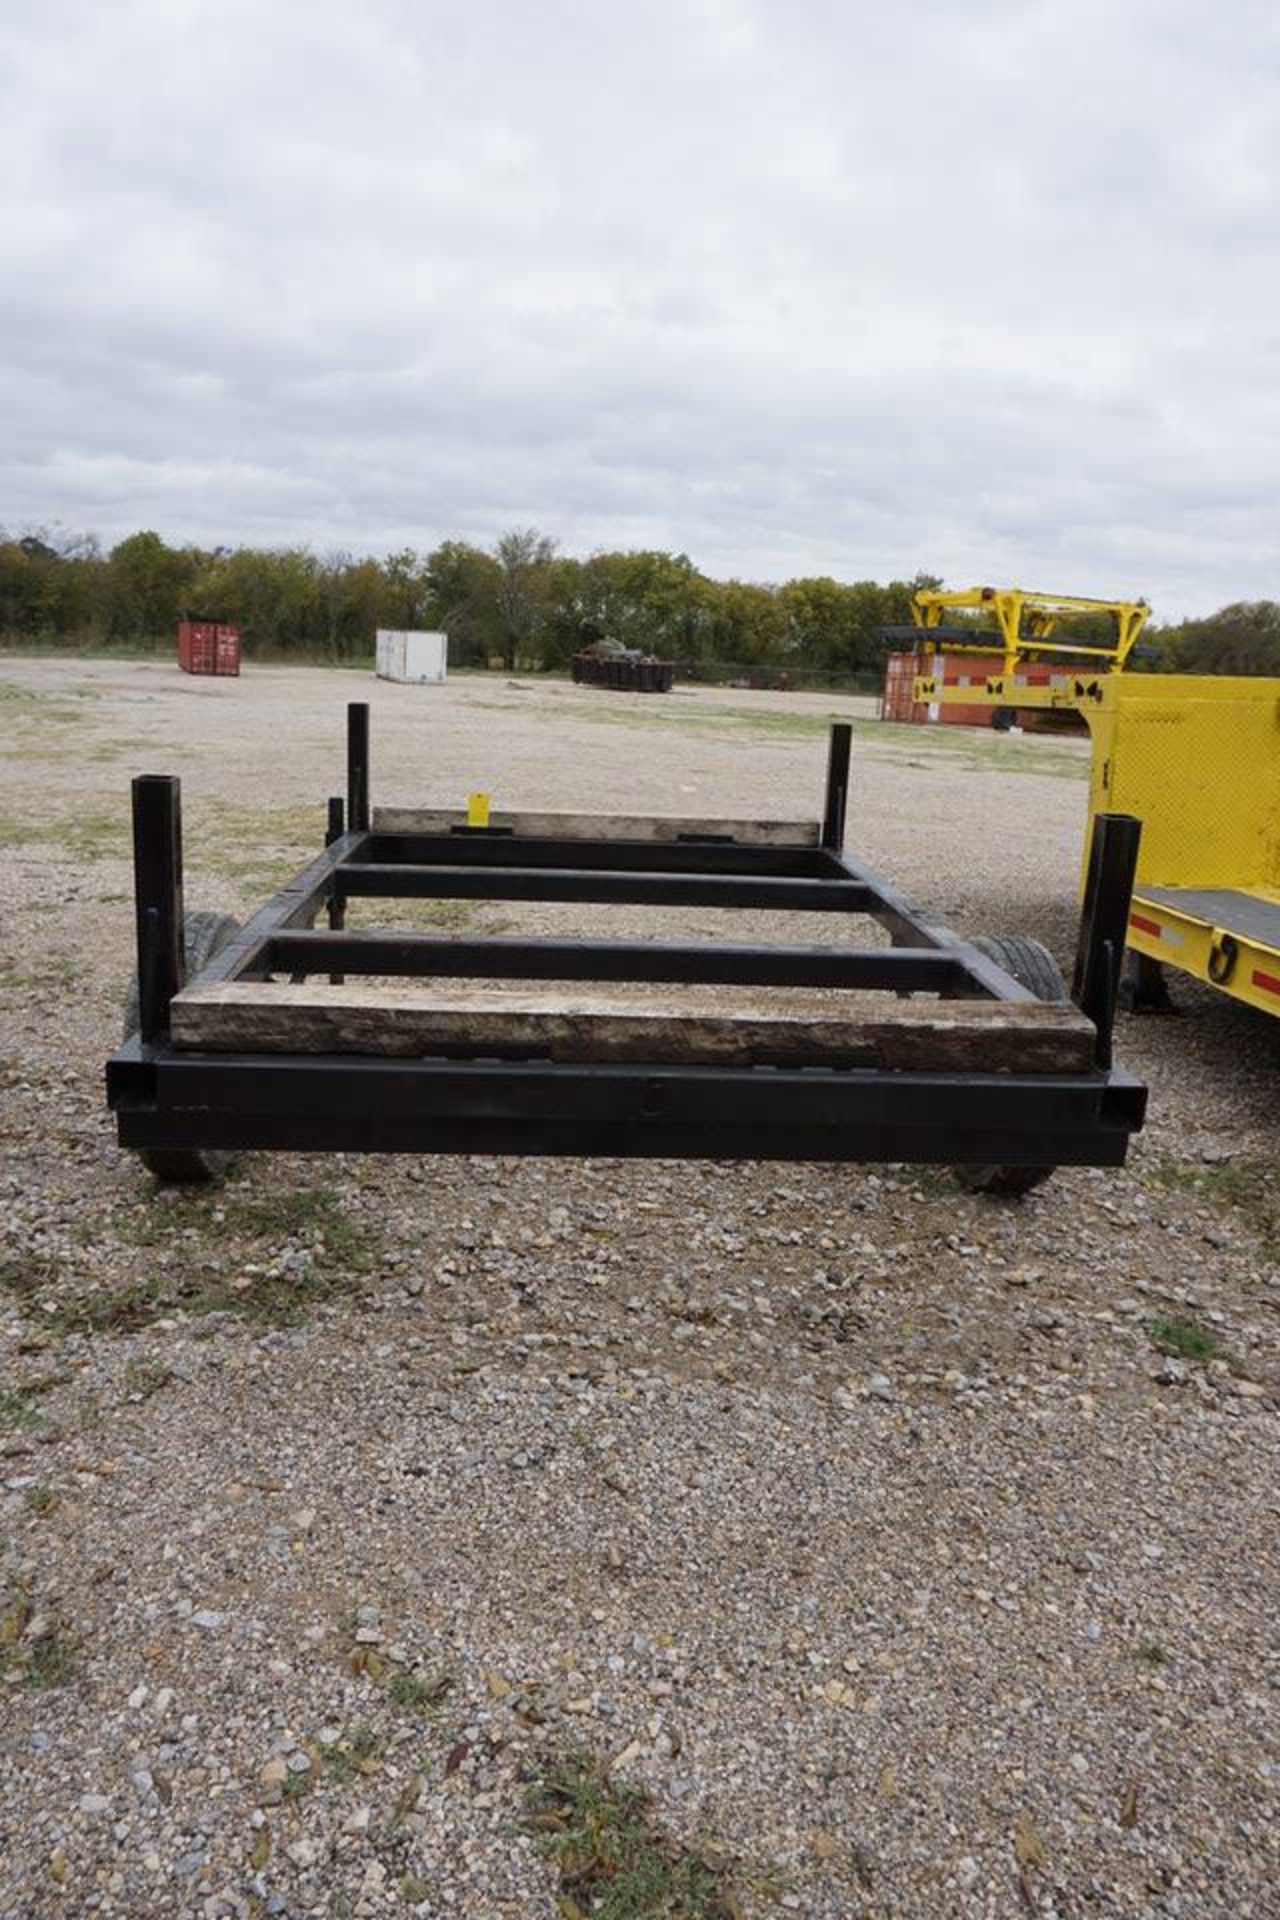 8' x 80" TRAILER FRAME (MUST BE REMOVED BY DECEMBER 22) - Image 3 of 5